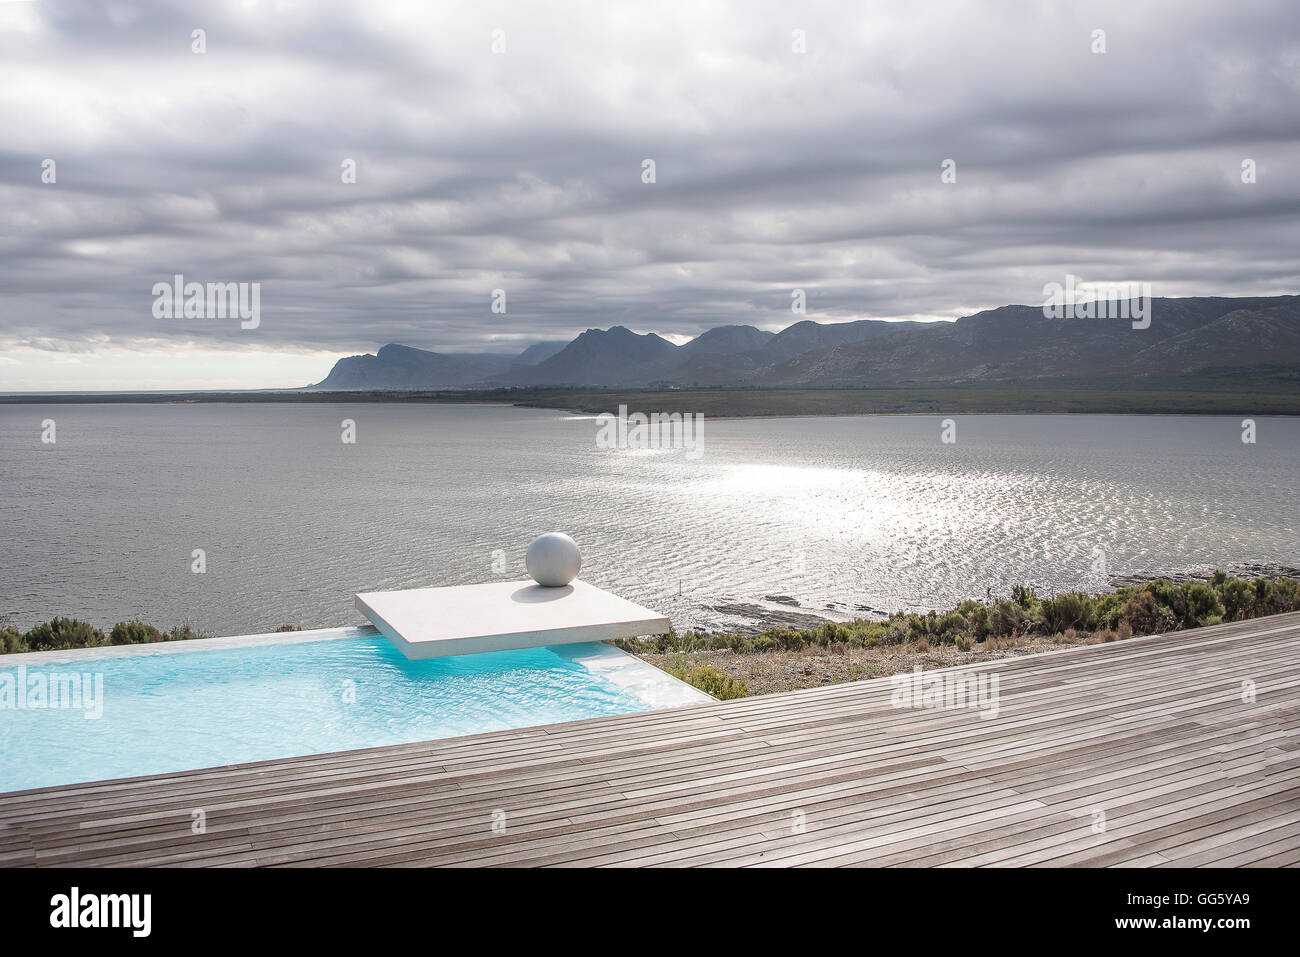 View of infinity pool at lakeside Stock Photo